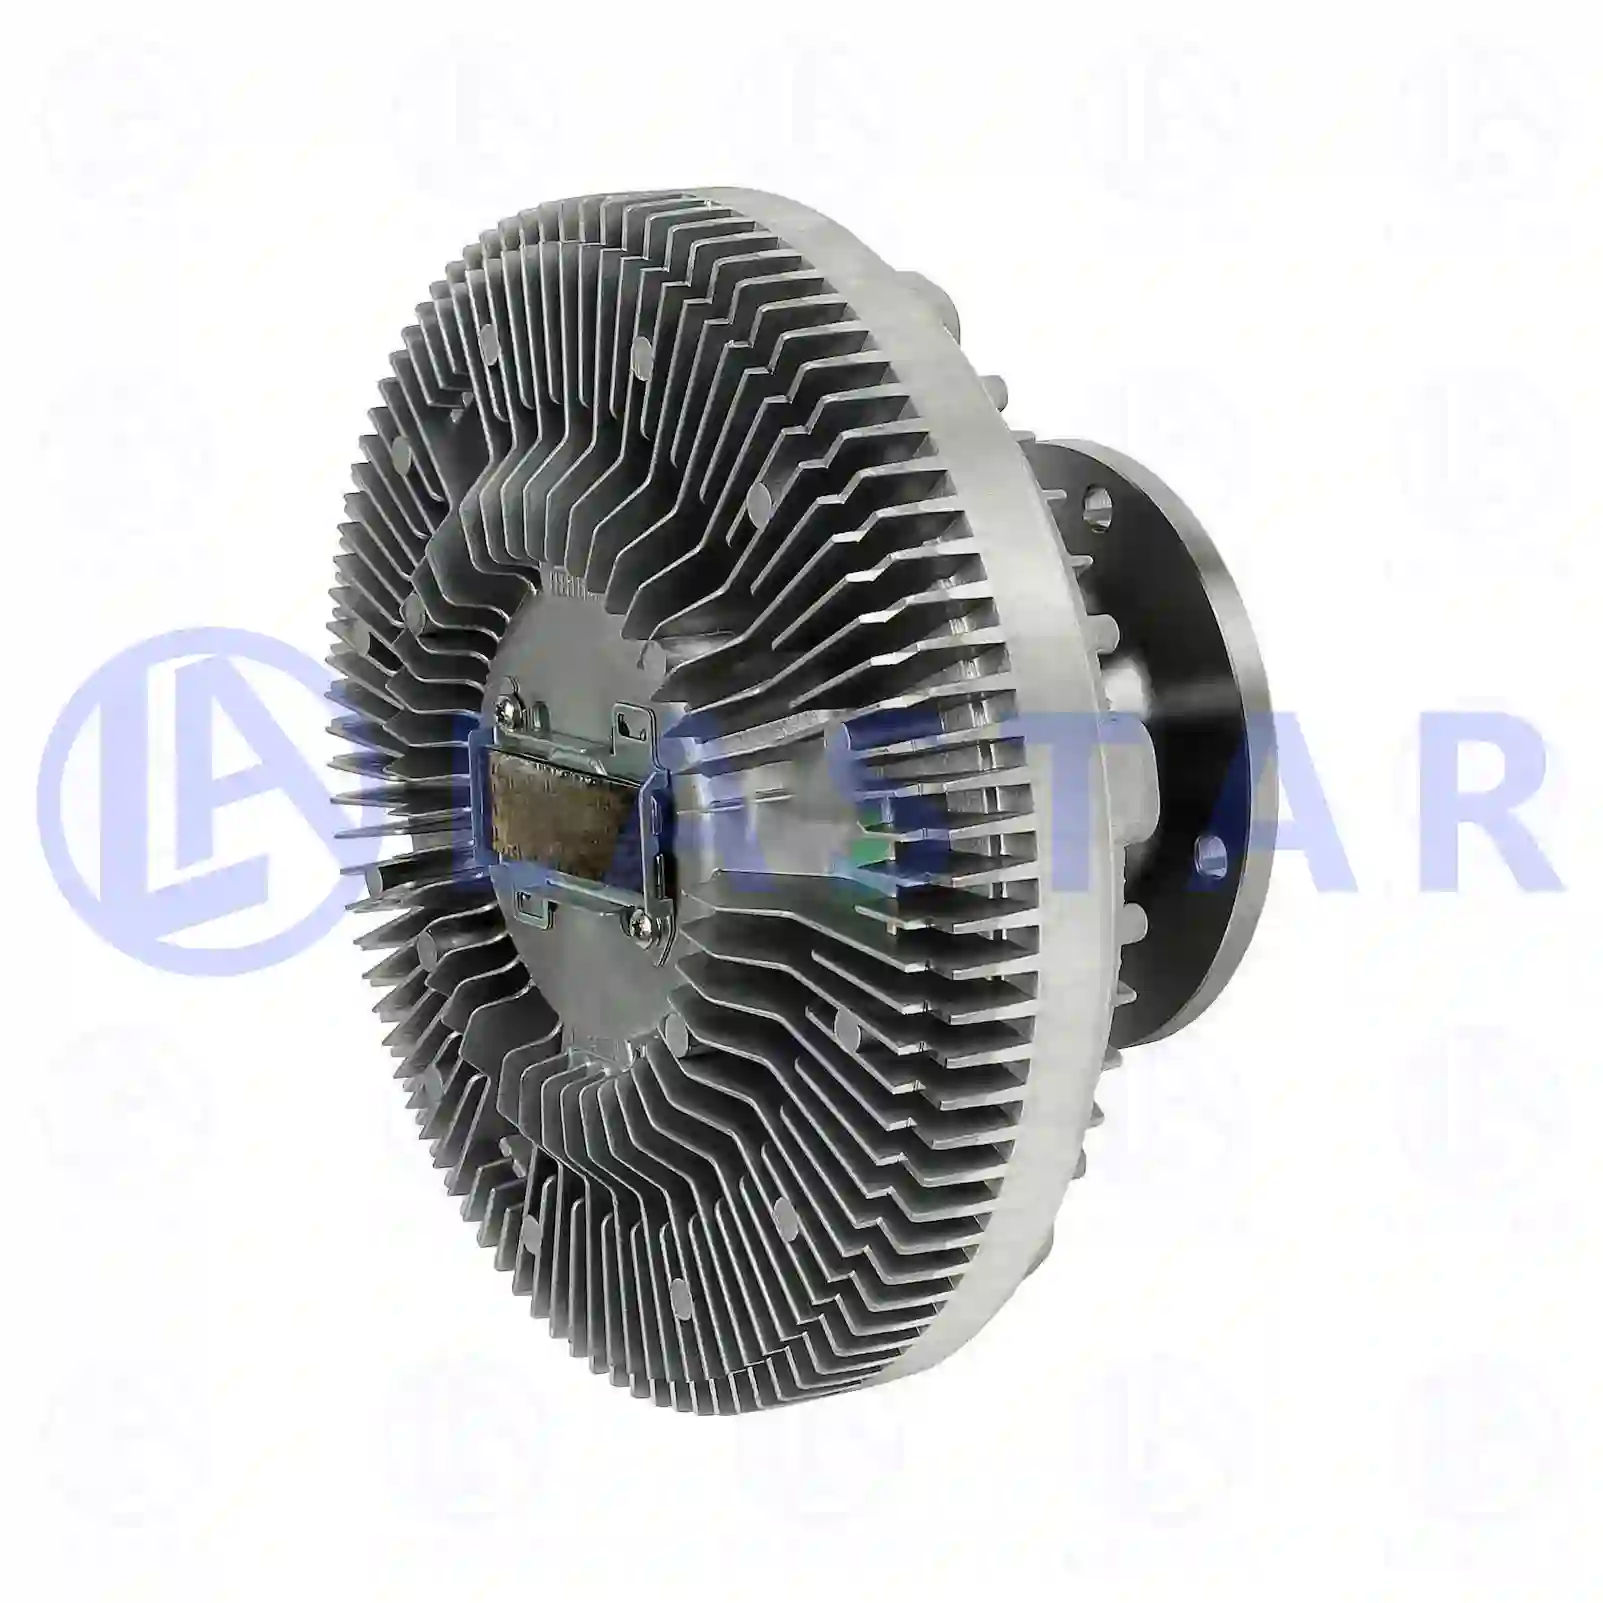 Fan clutch, 77708835, 98112213, 99450014, 99487209 ||  77708835 Lastar Spare Part | Truck Spare Parts, Auotomotive Spare Parts Fan clutch, 77708835, 98112213, 99450014, 99487209 ||  77708835 Lastar Spare Part | Truck Spare Parts, Auotomotive Spare Parts